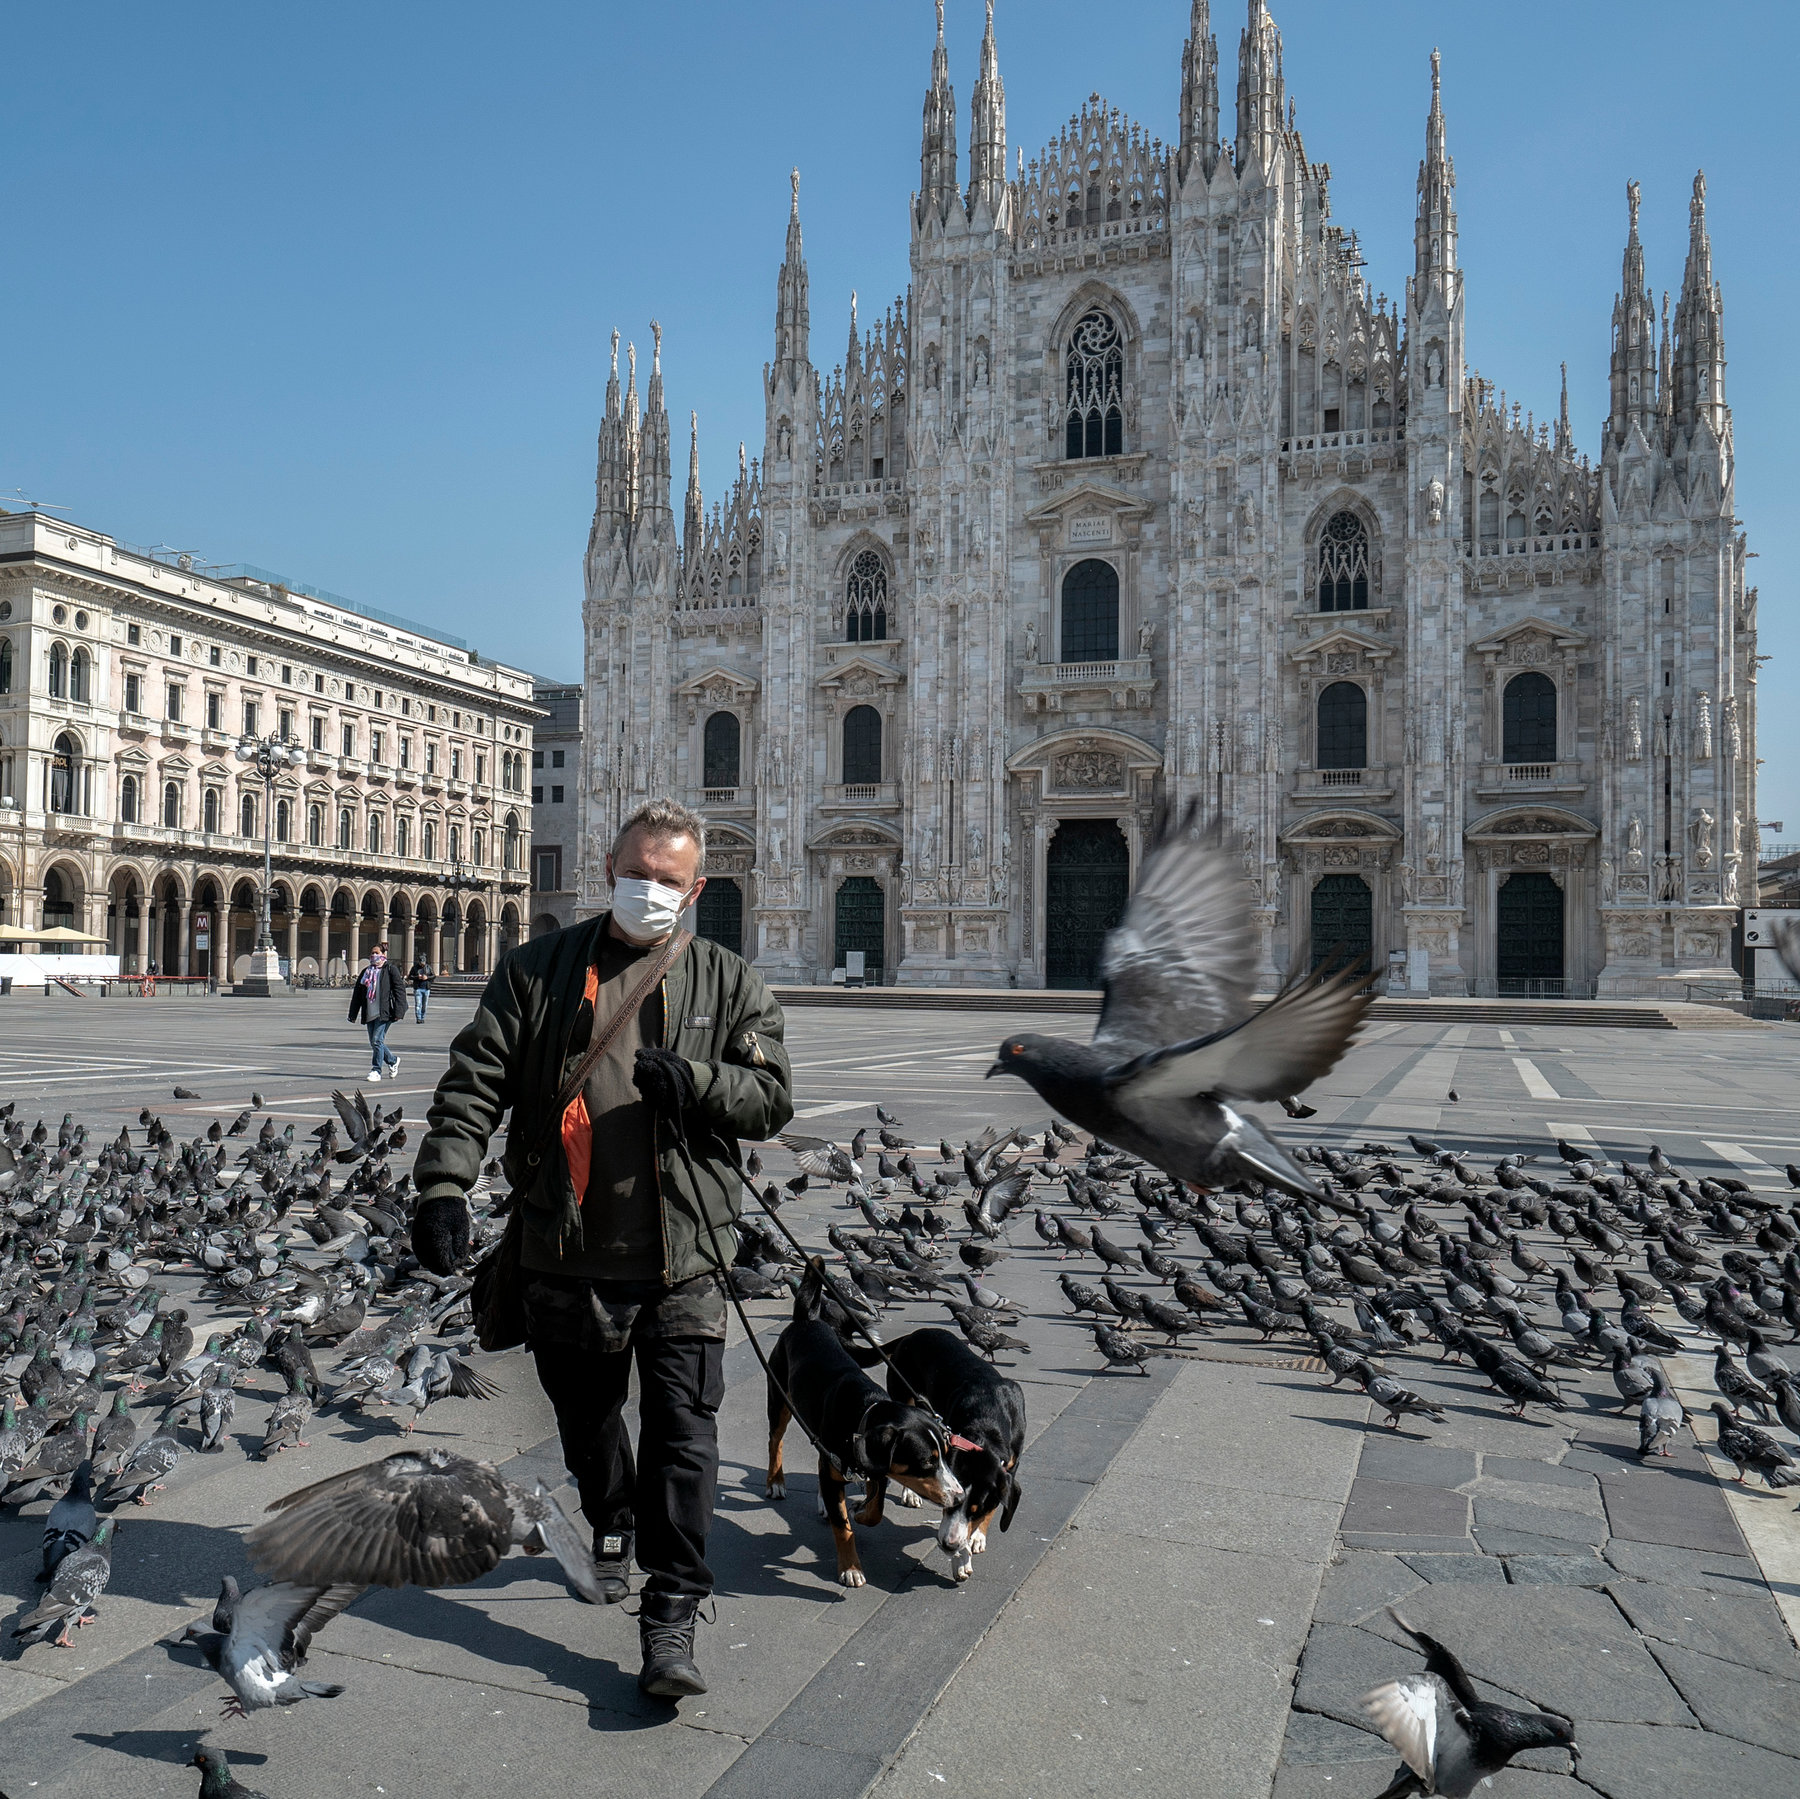 Italy structure with man surrounded by birds